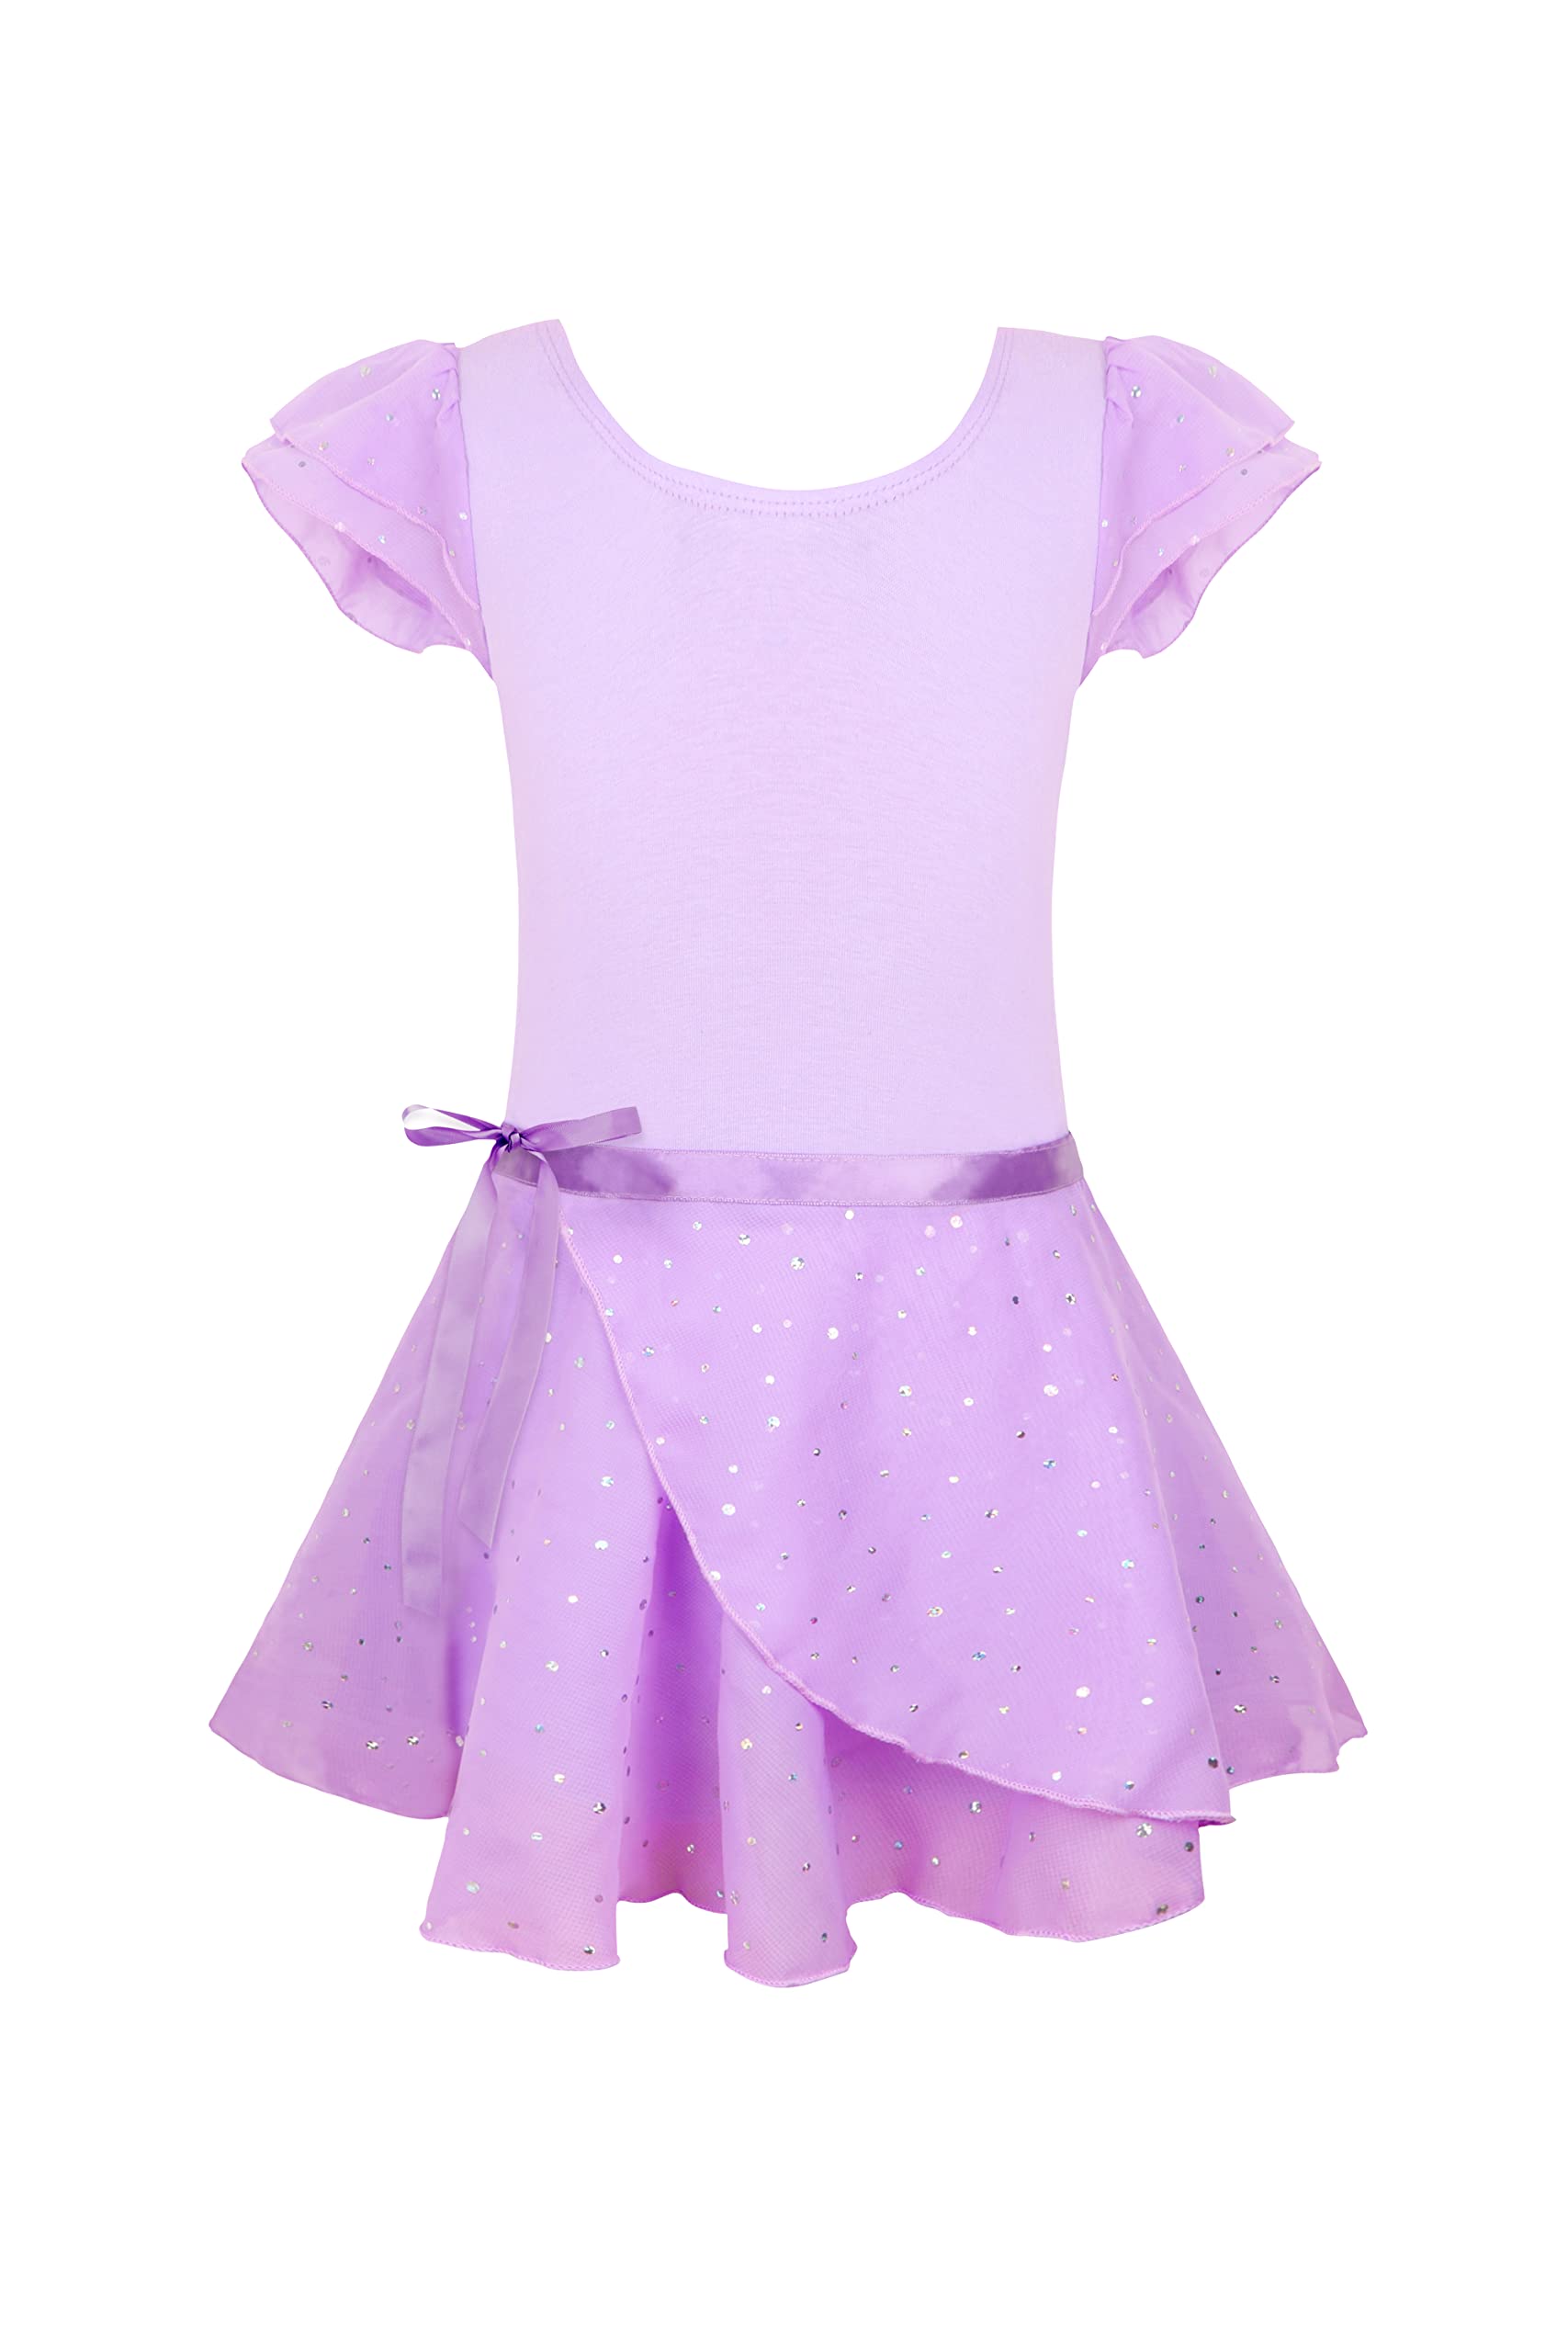 EQSJIU Purple Ballet Leotards For girls Size 7-8 Years Old 78 Ruffle Sleeve Sequins Skirted Leotards With Separate Skirt